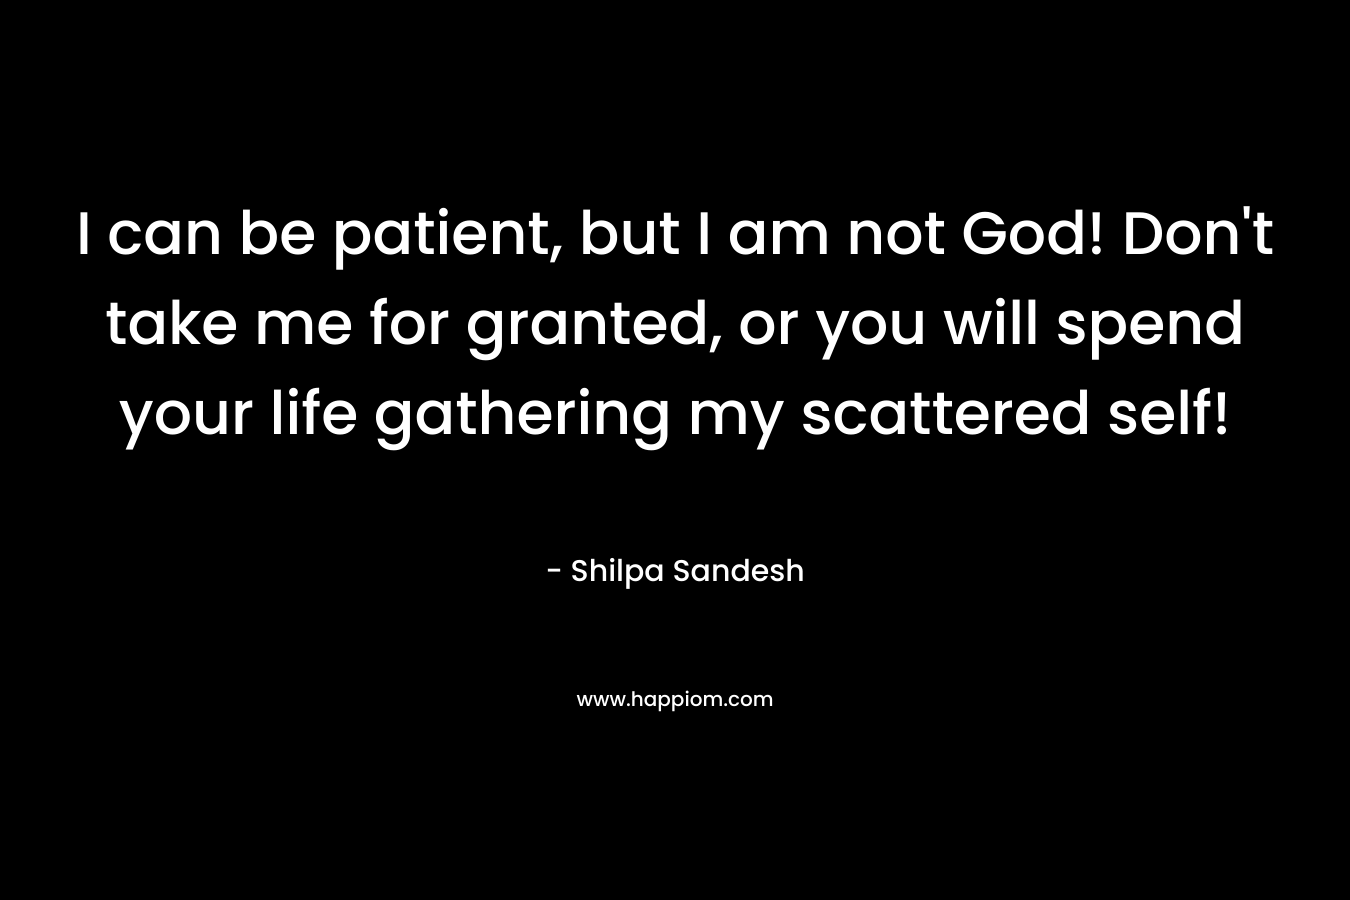 I can be patient, but I am not God! Don't take me for granted, or you will spend your life gathering my scattered self!